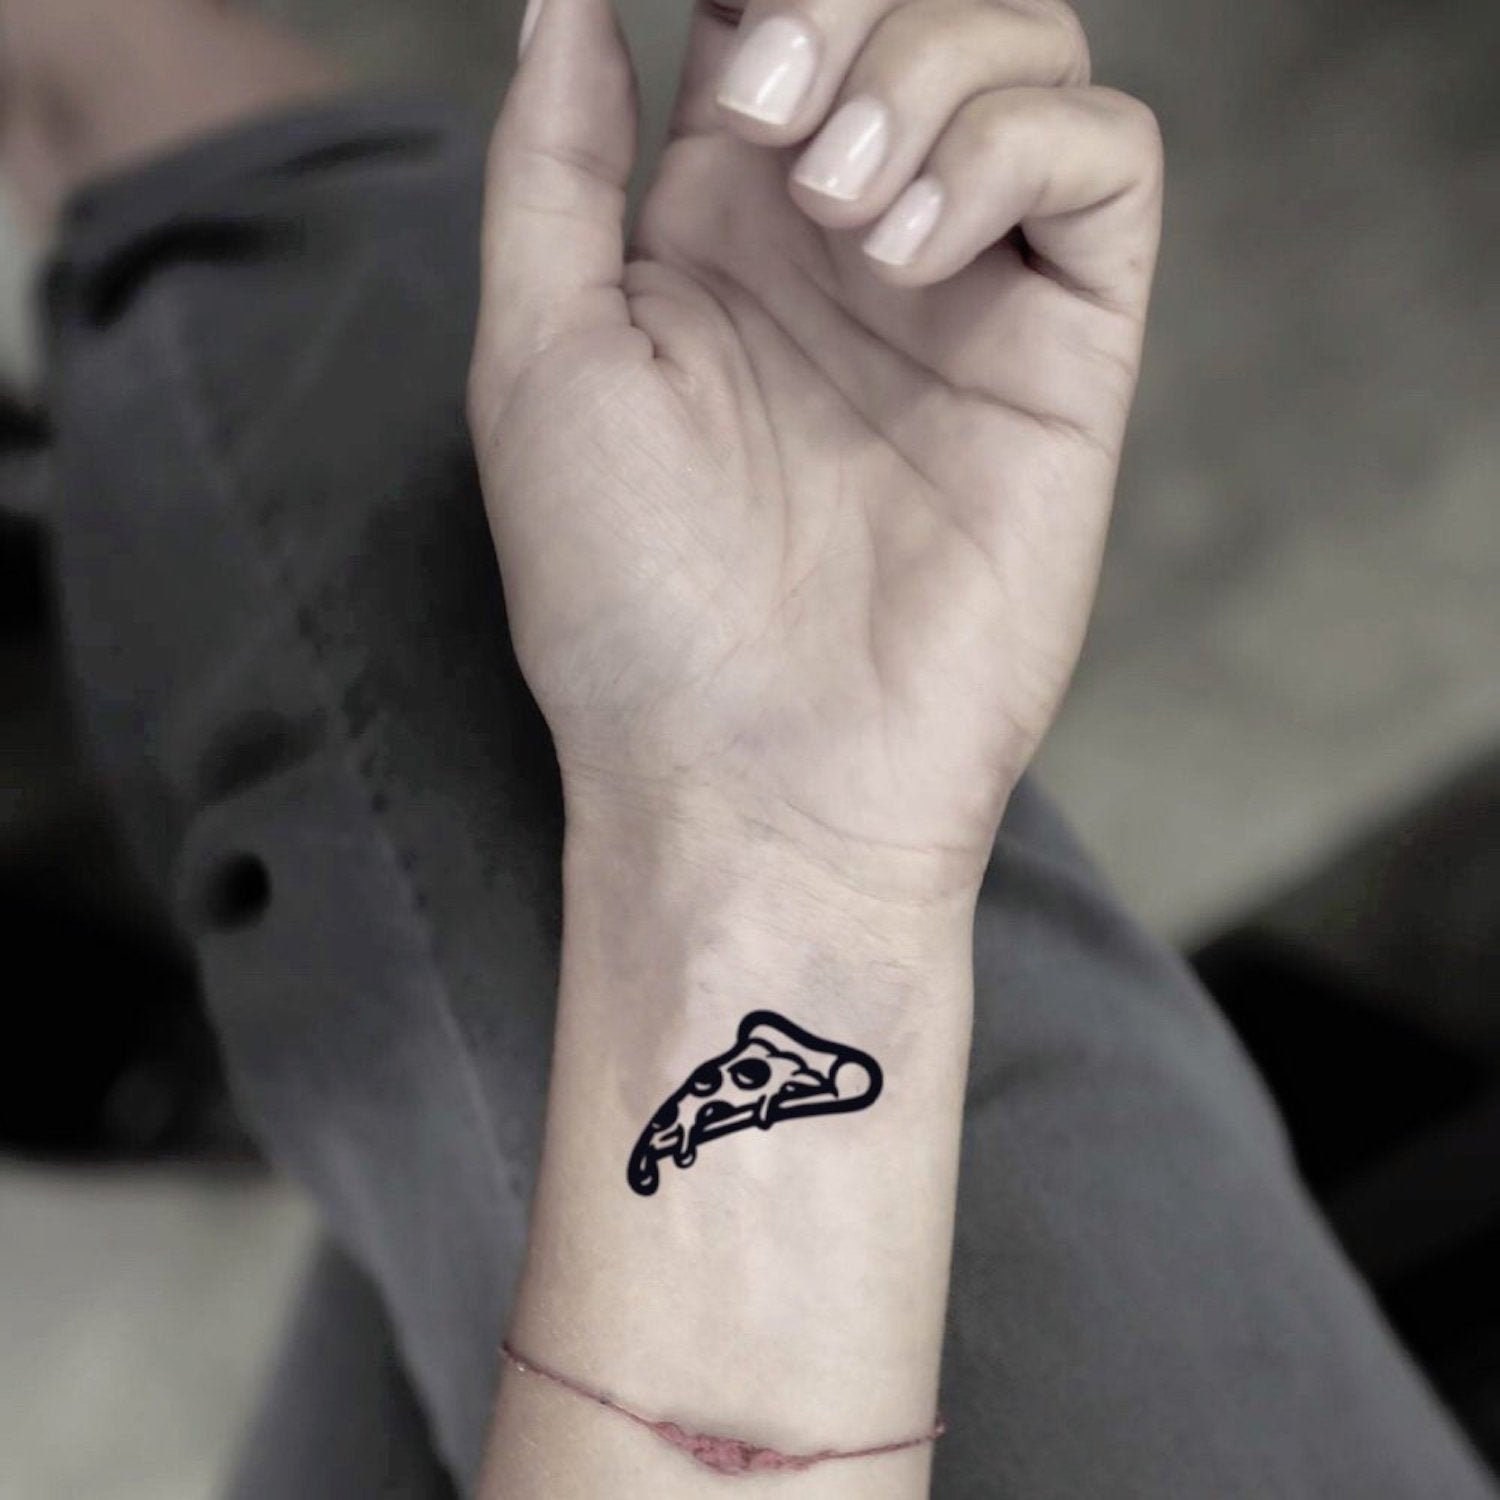 60 Amazing Pizza Tattoo Designs with Meanings Ideas and Celebrities   Body Art Guru